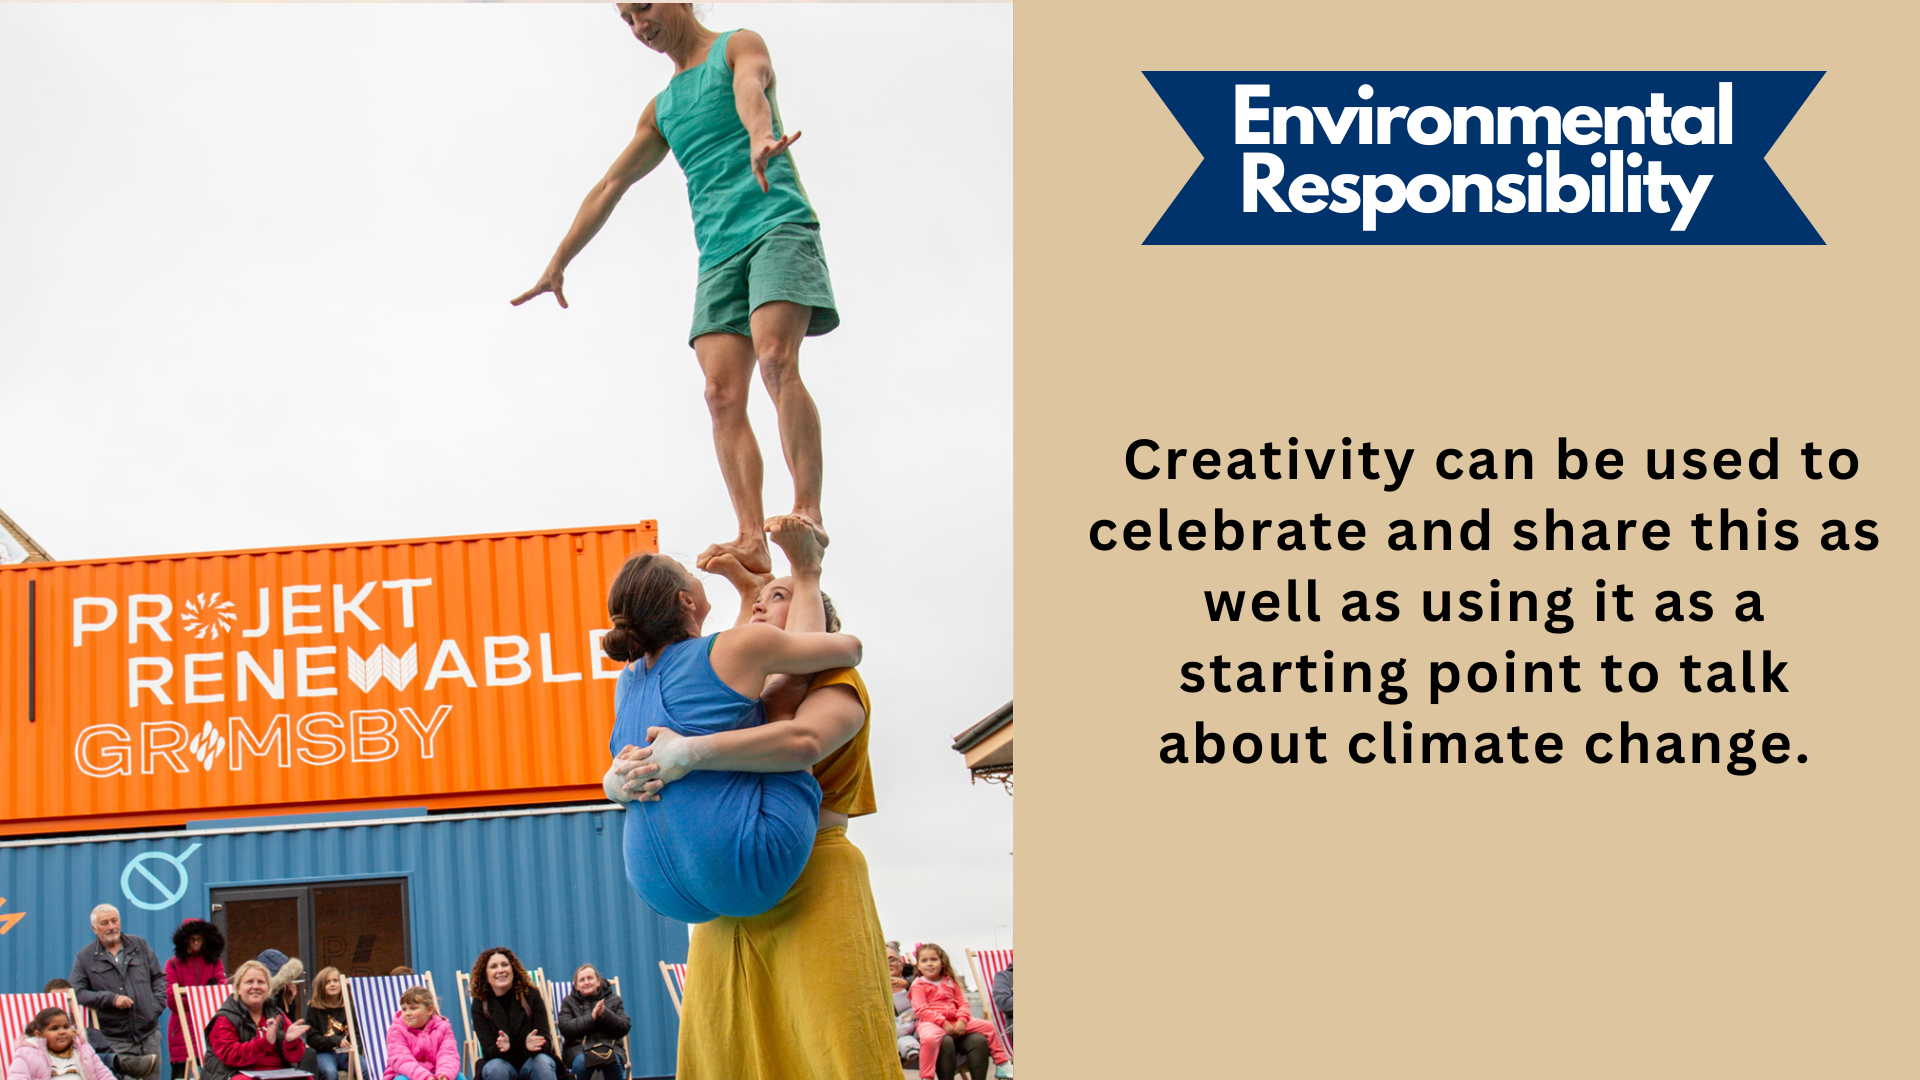 Environmental Responsibility. Creativity can be used to celebrate and share this as well as using it as a starting point to talk about climate change.